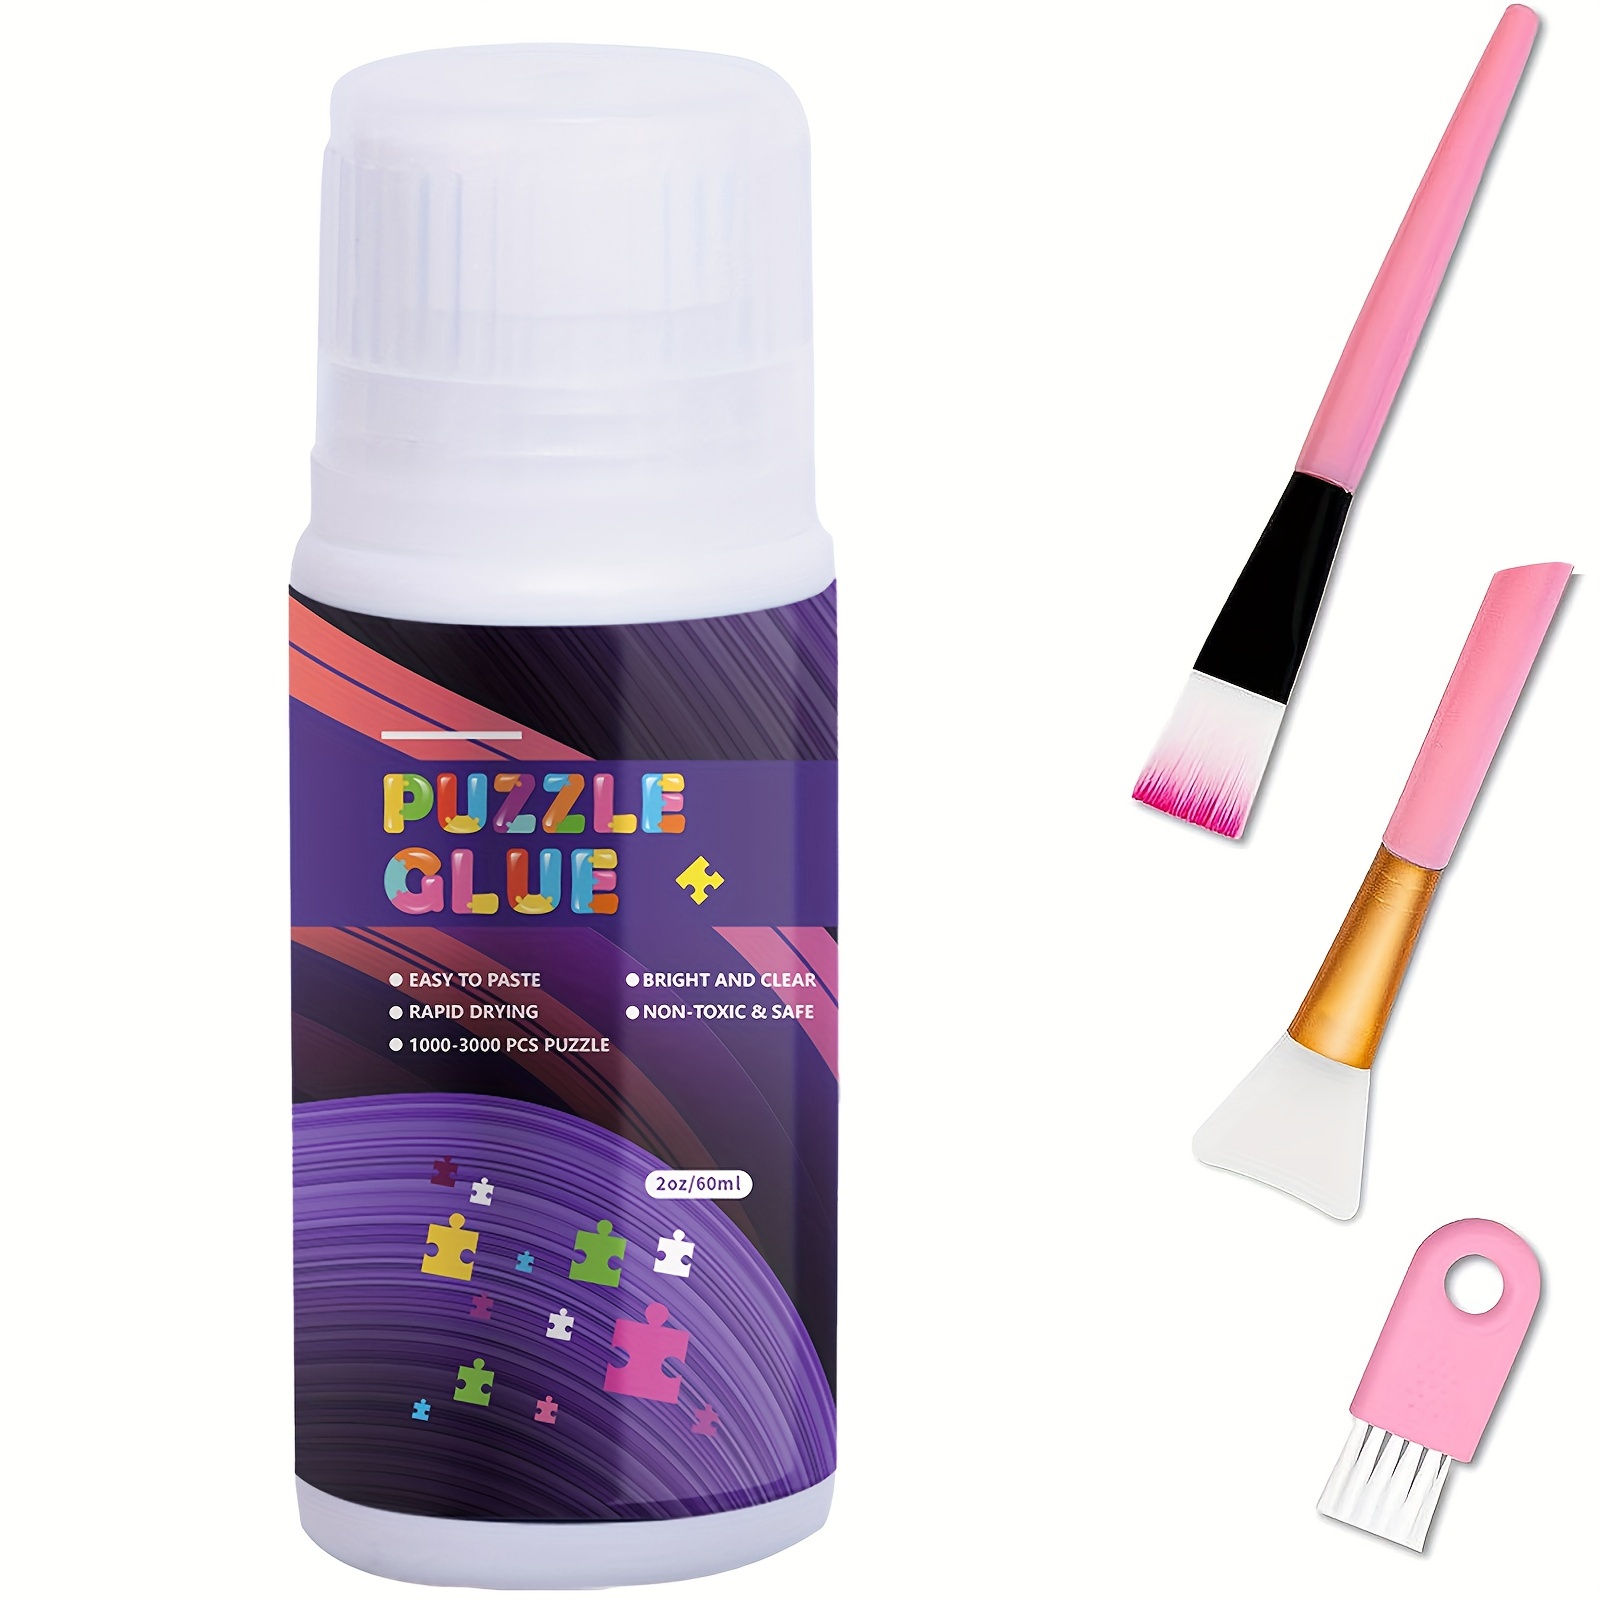  Puzzle Glue Clear with Applicator, Jigsaw Puzzle Glue